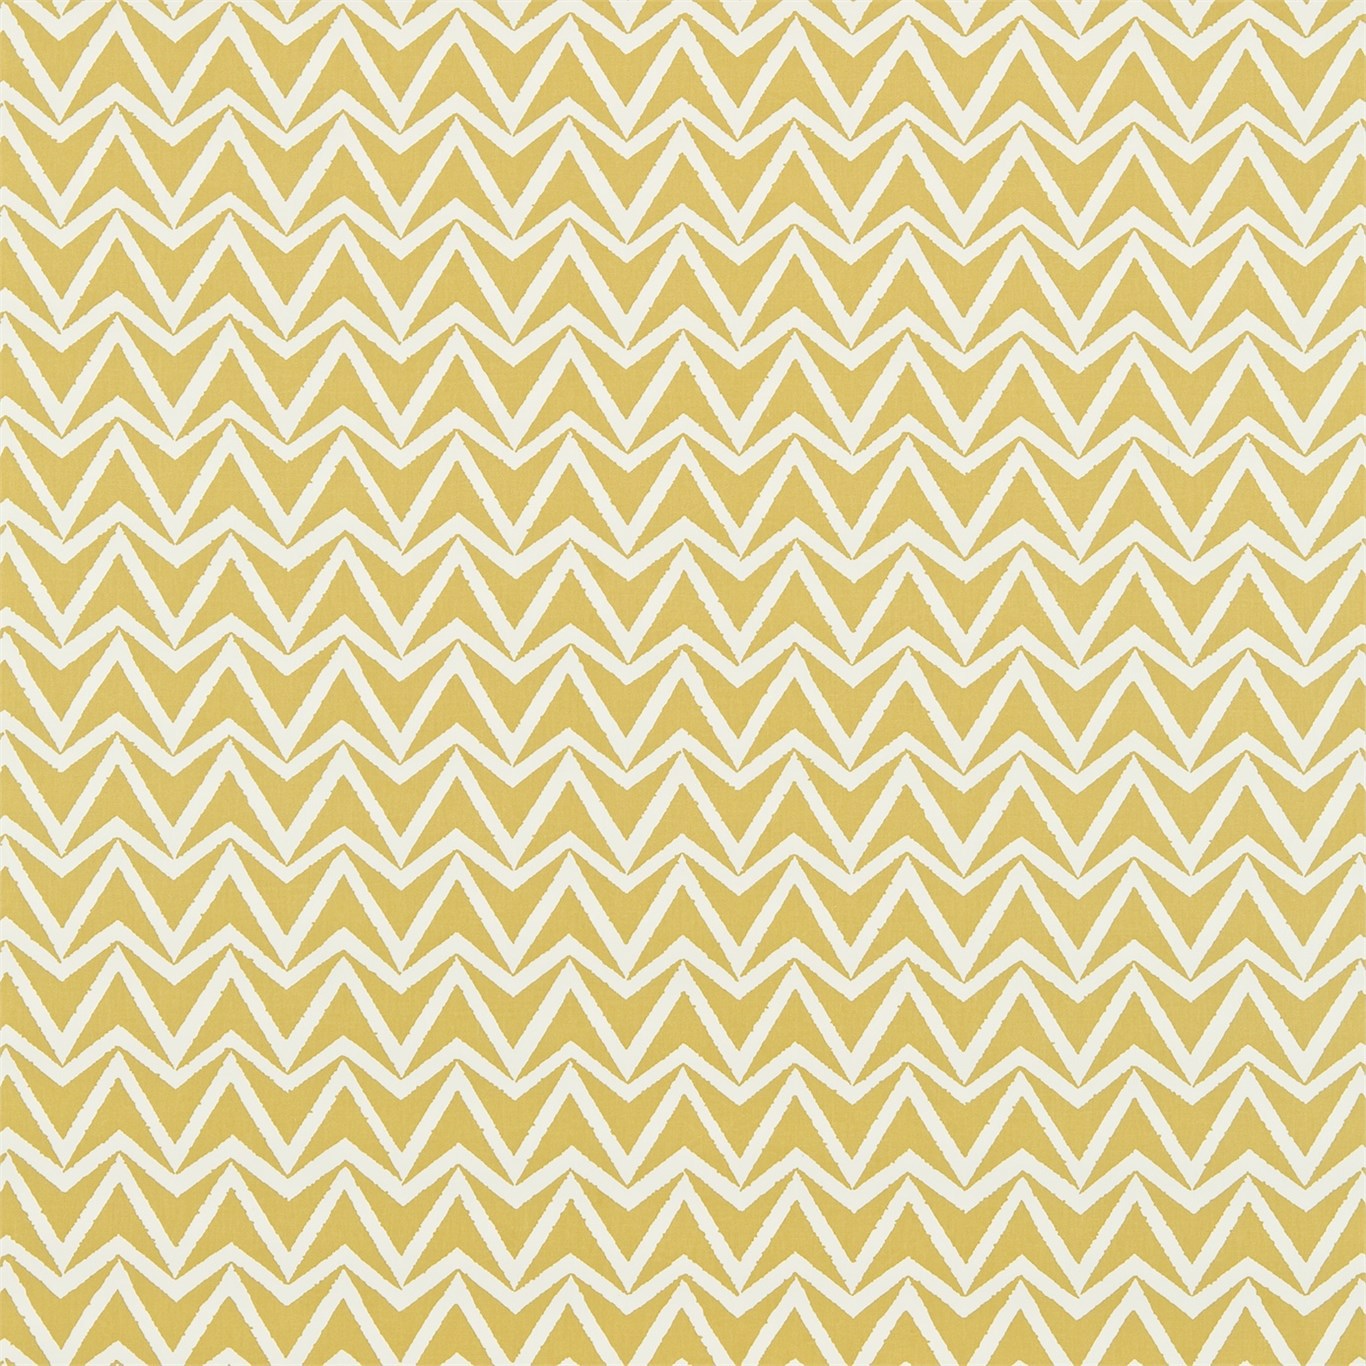 Dhurrie Fabric by Scion - NWAB120179 - Sauterne